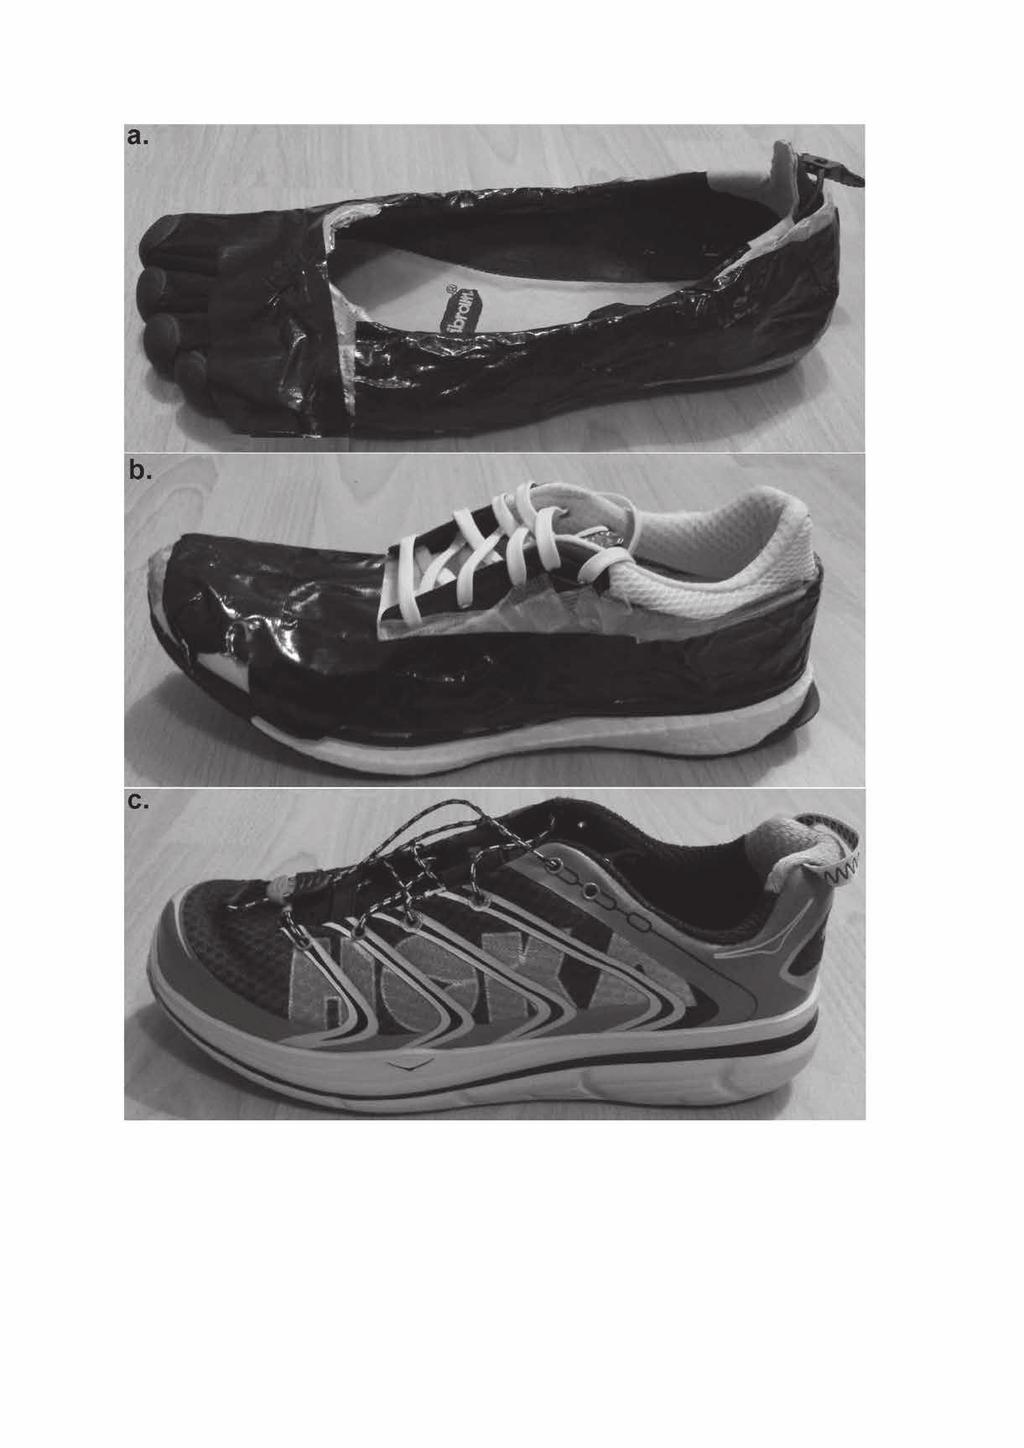 Effects of different footwear on running economy their habitual dietary intake in the 48 h prior to testing and attend the laboratory a minimum of 4 h postprandial.